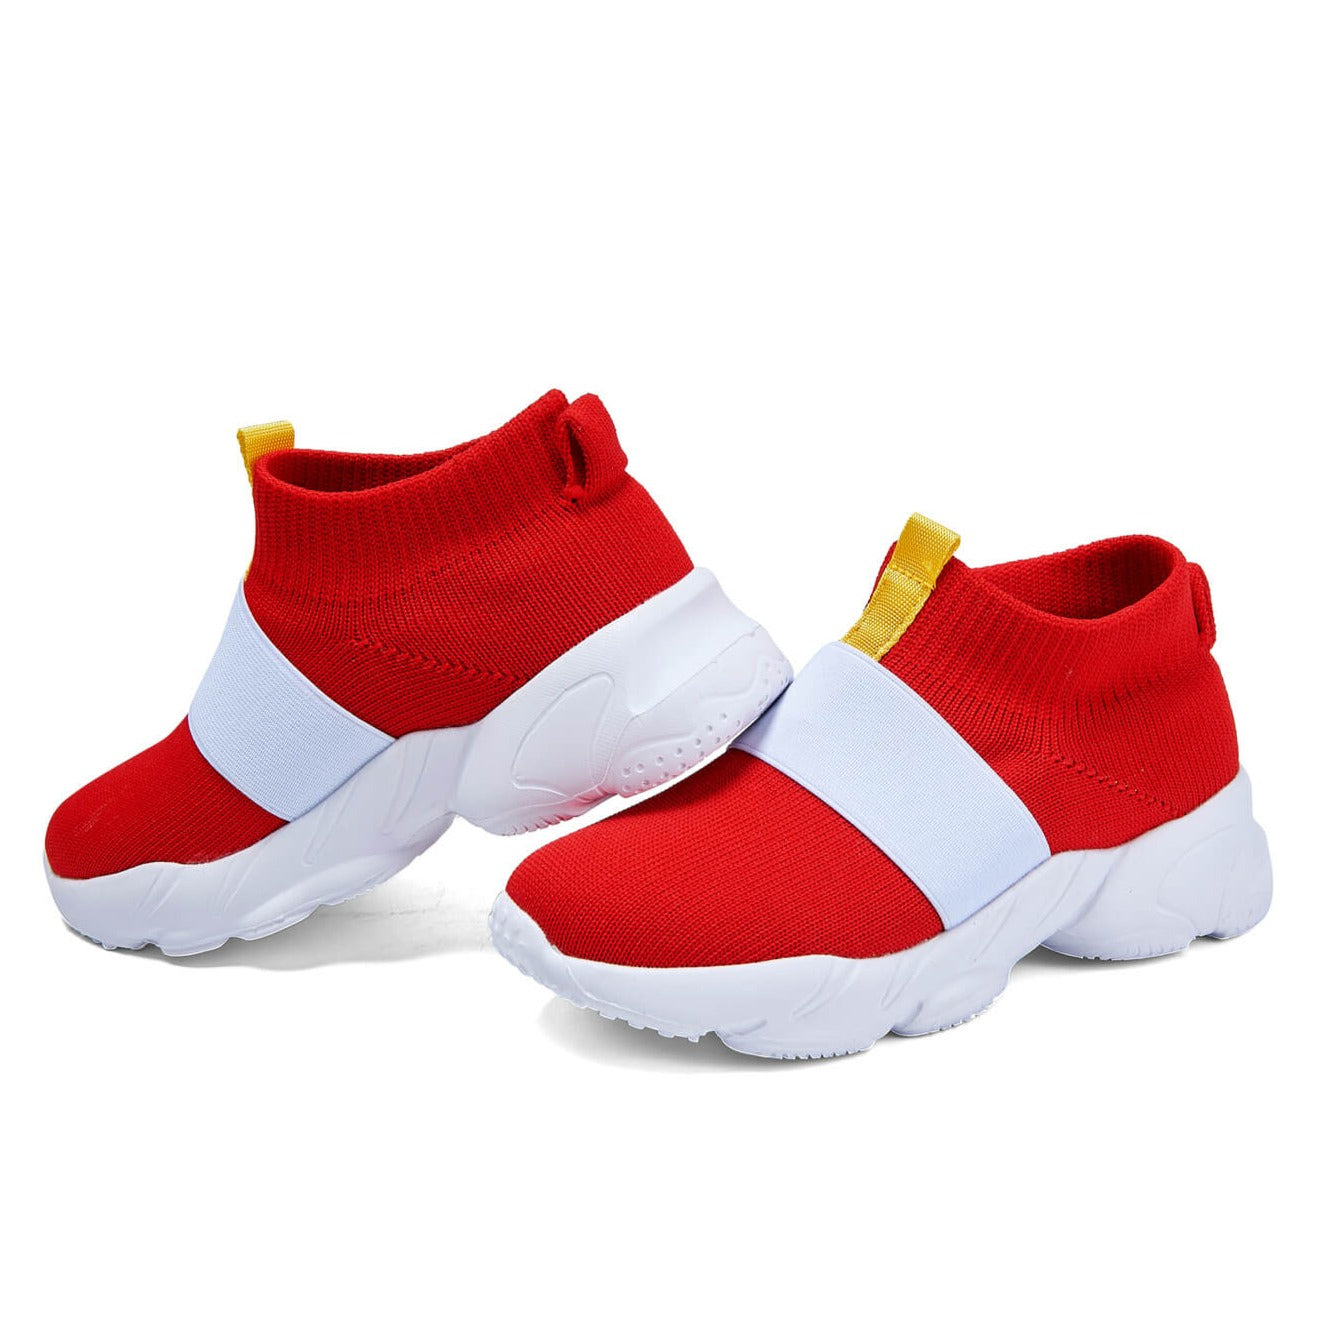 Sonic Shoes for Boys Girls Kids - Style 3